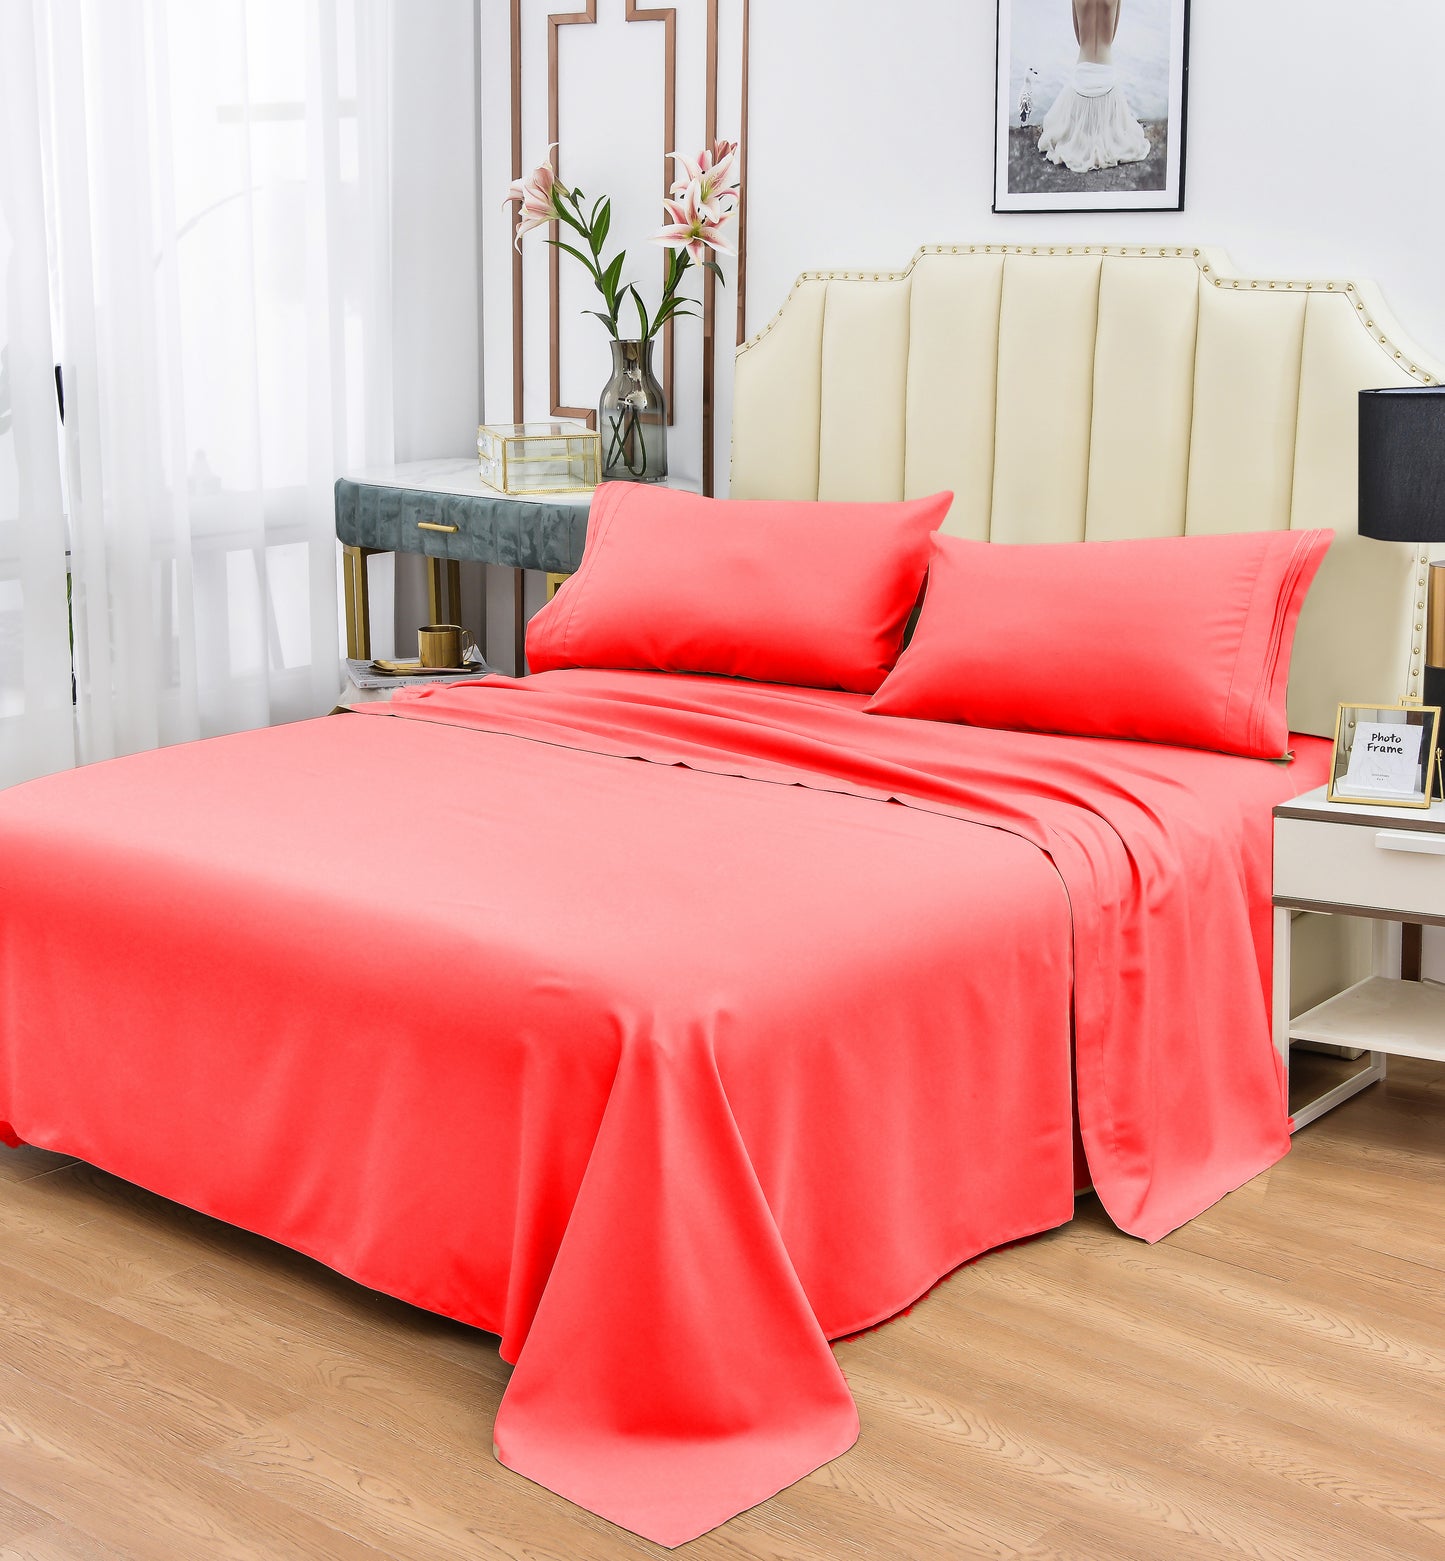 Cool Bamboo – Bed Sheet Sets ( More Color Options)